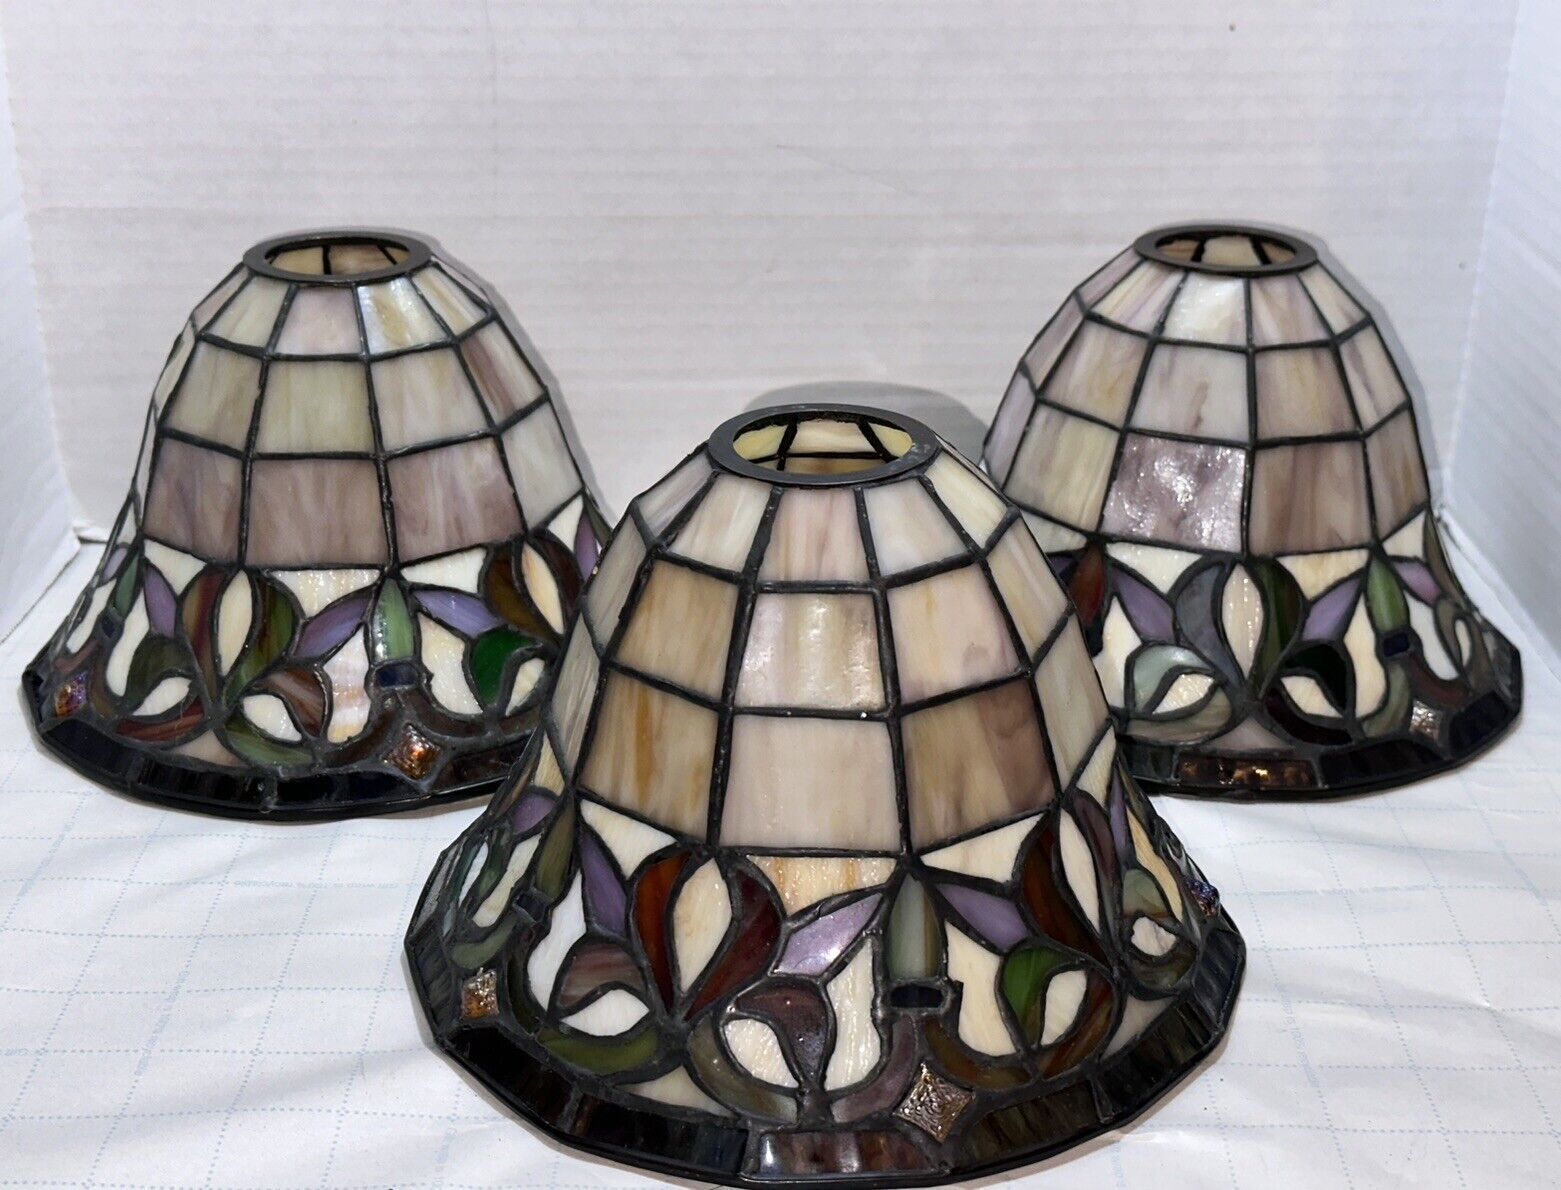 3 PC Vintage Tiffany Style Stained Glass Bell Shaped Ceiling Light Lamp Shades